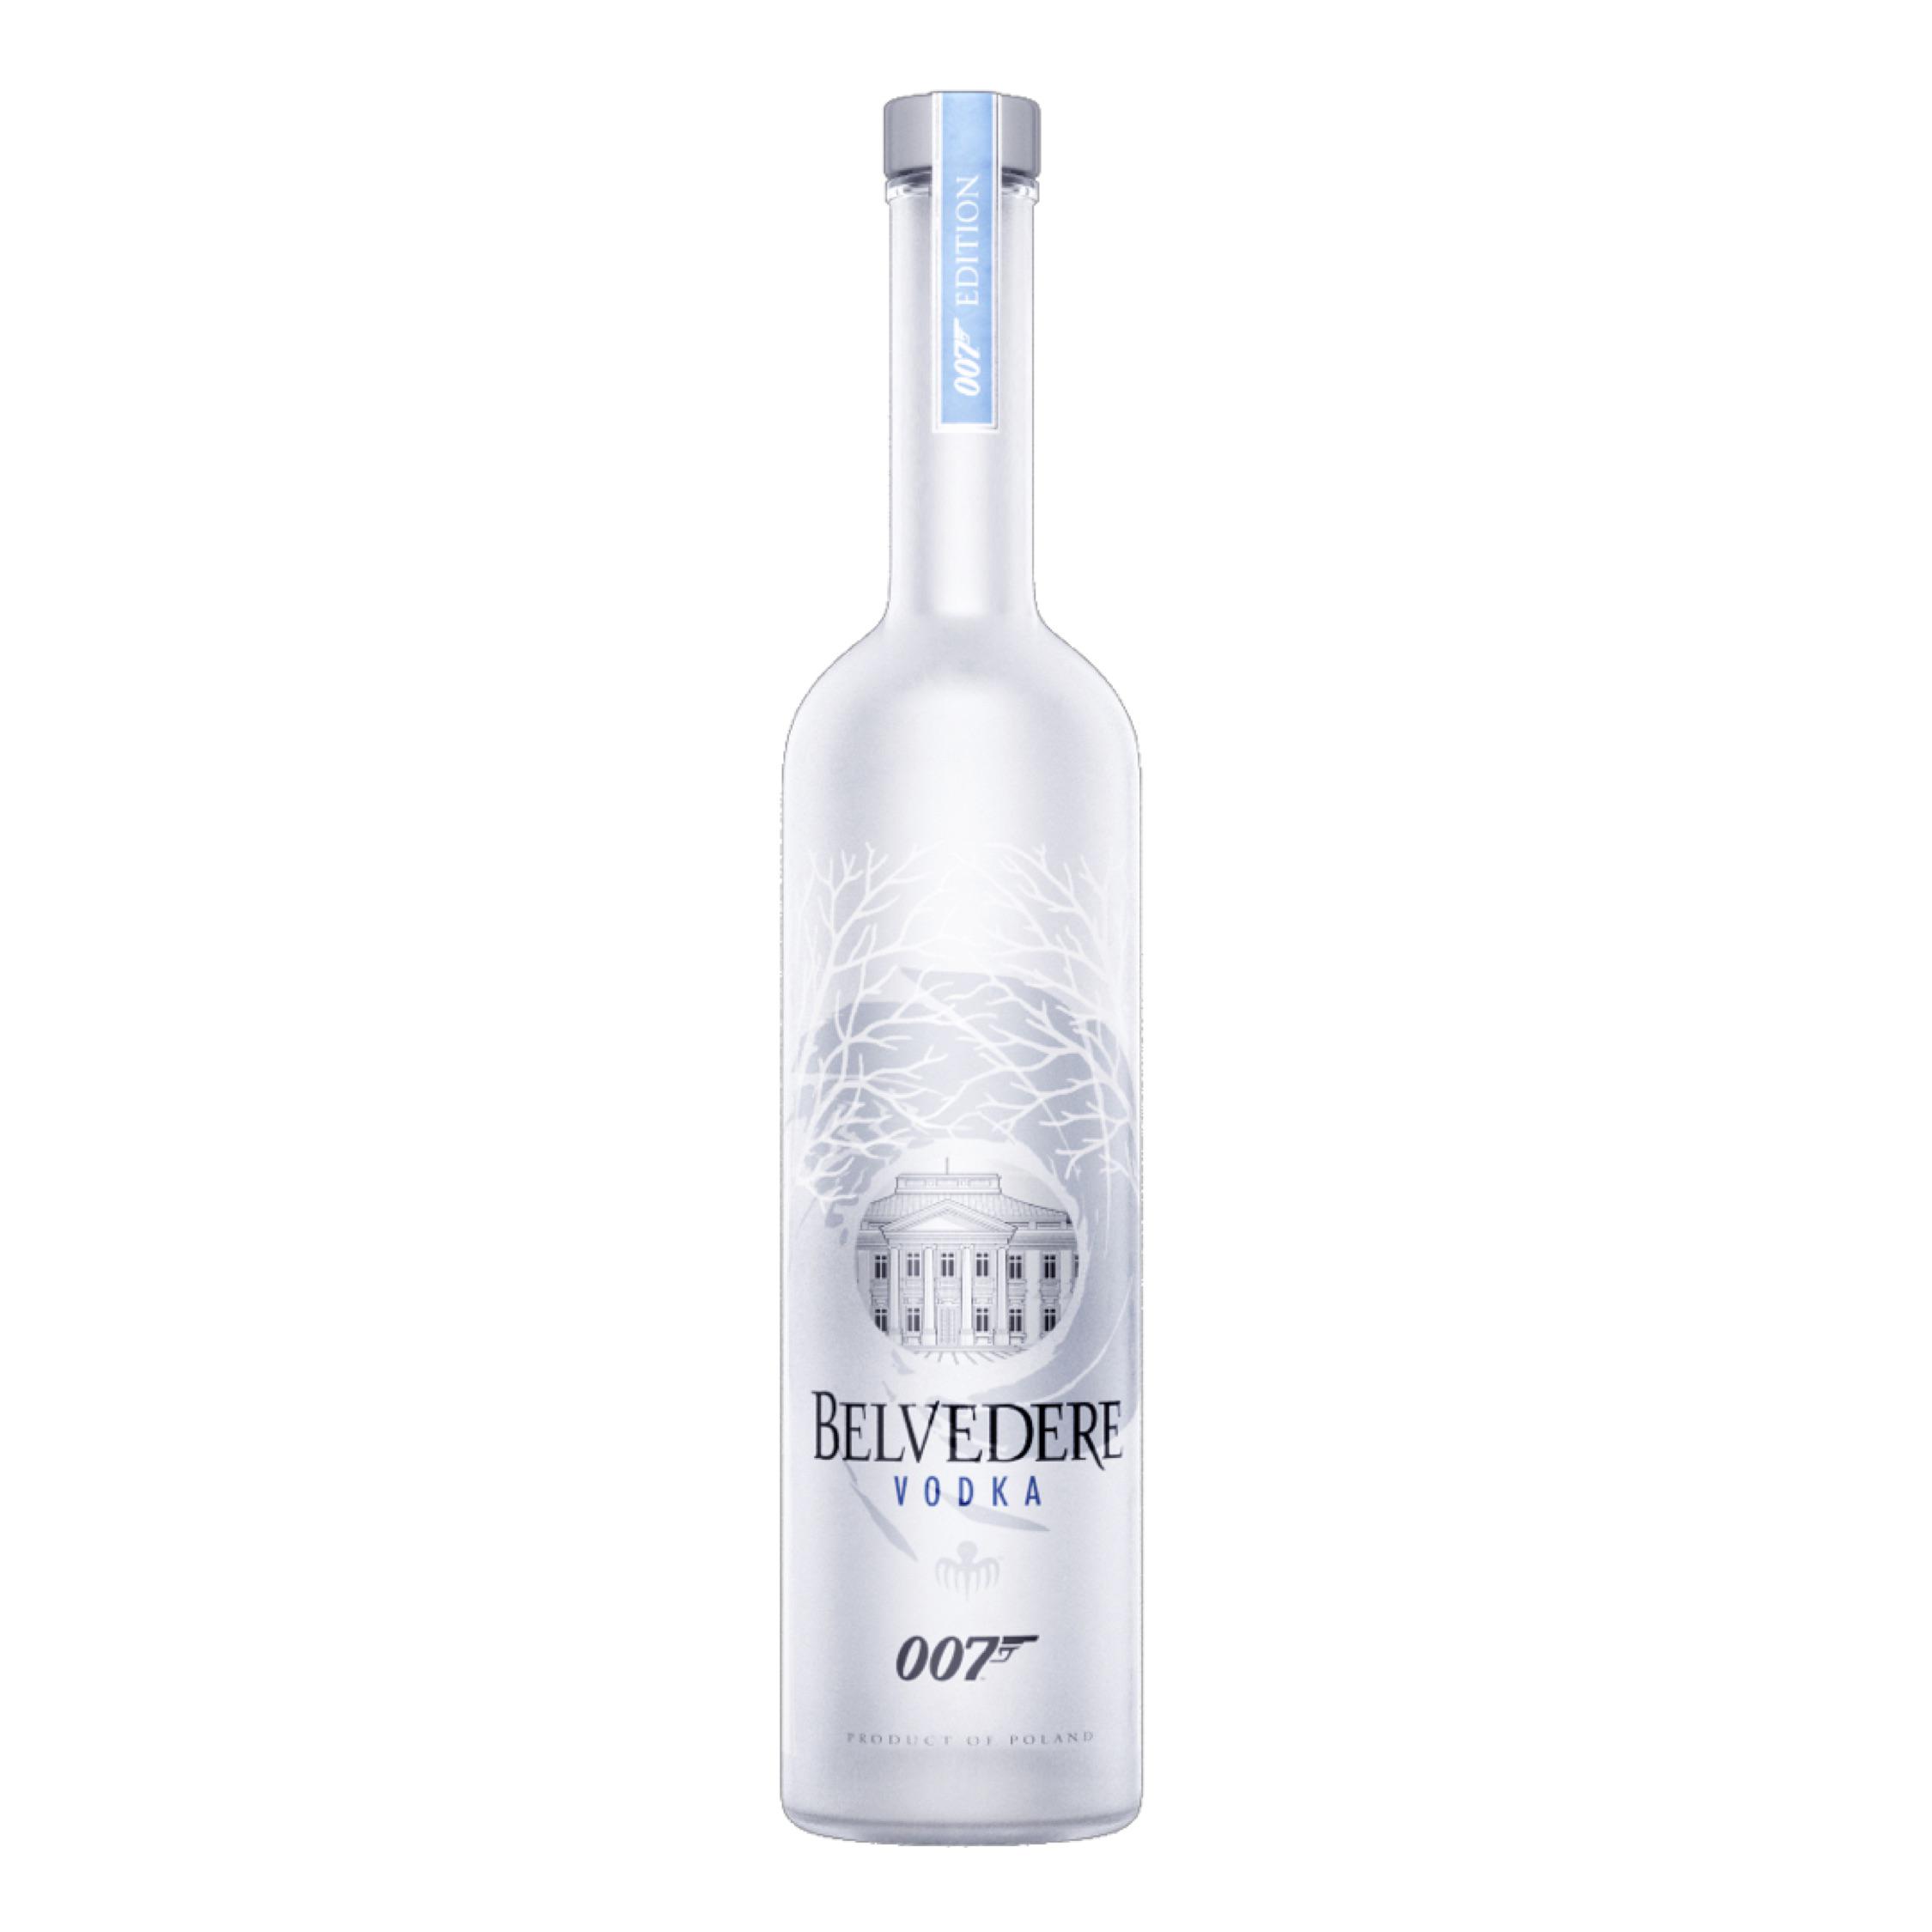 Belvedere Vodka on X: Secure your Limited Edition Belvedere @007